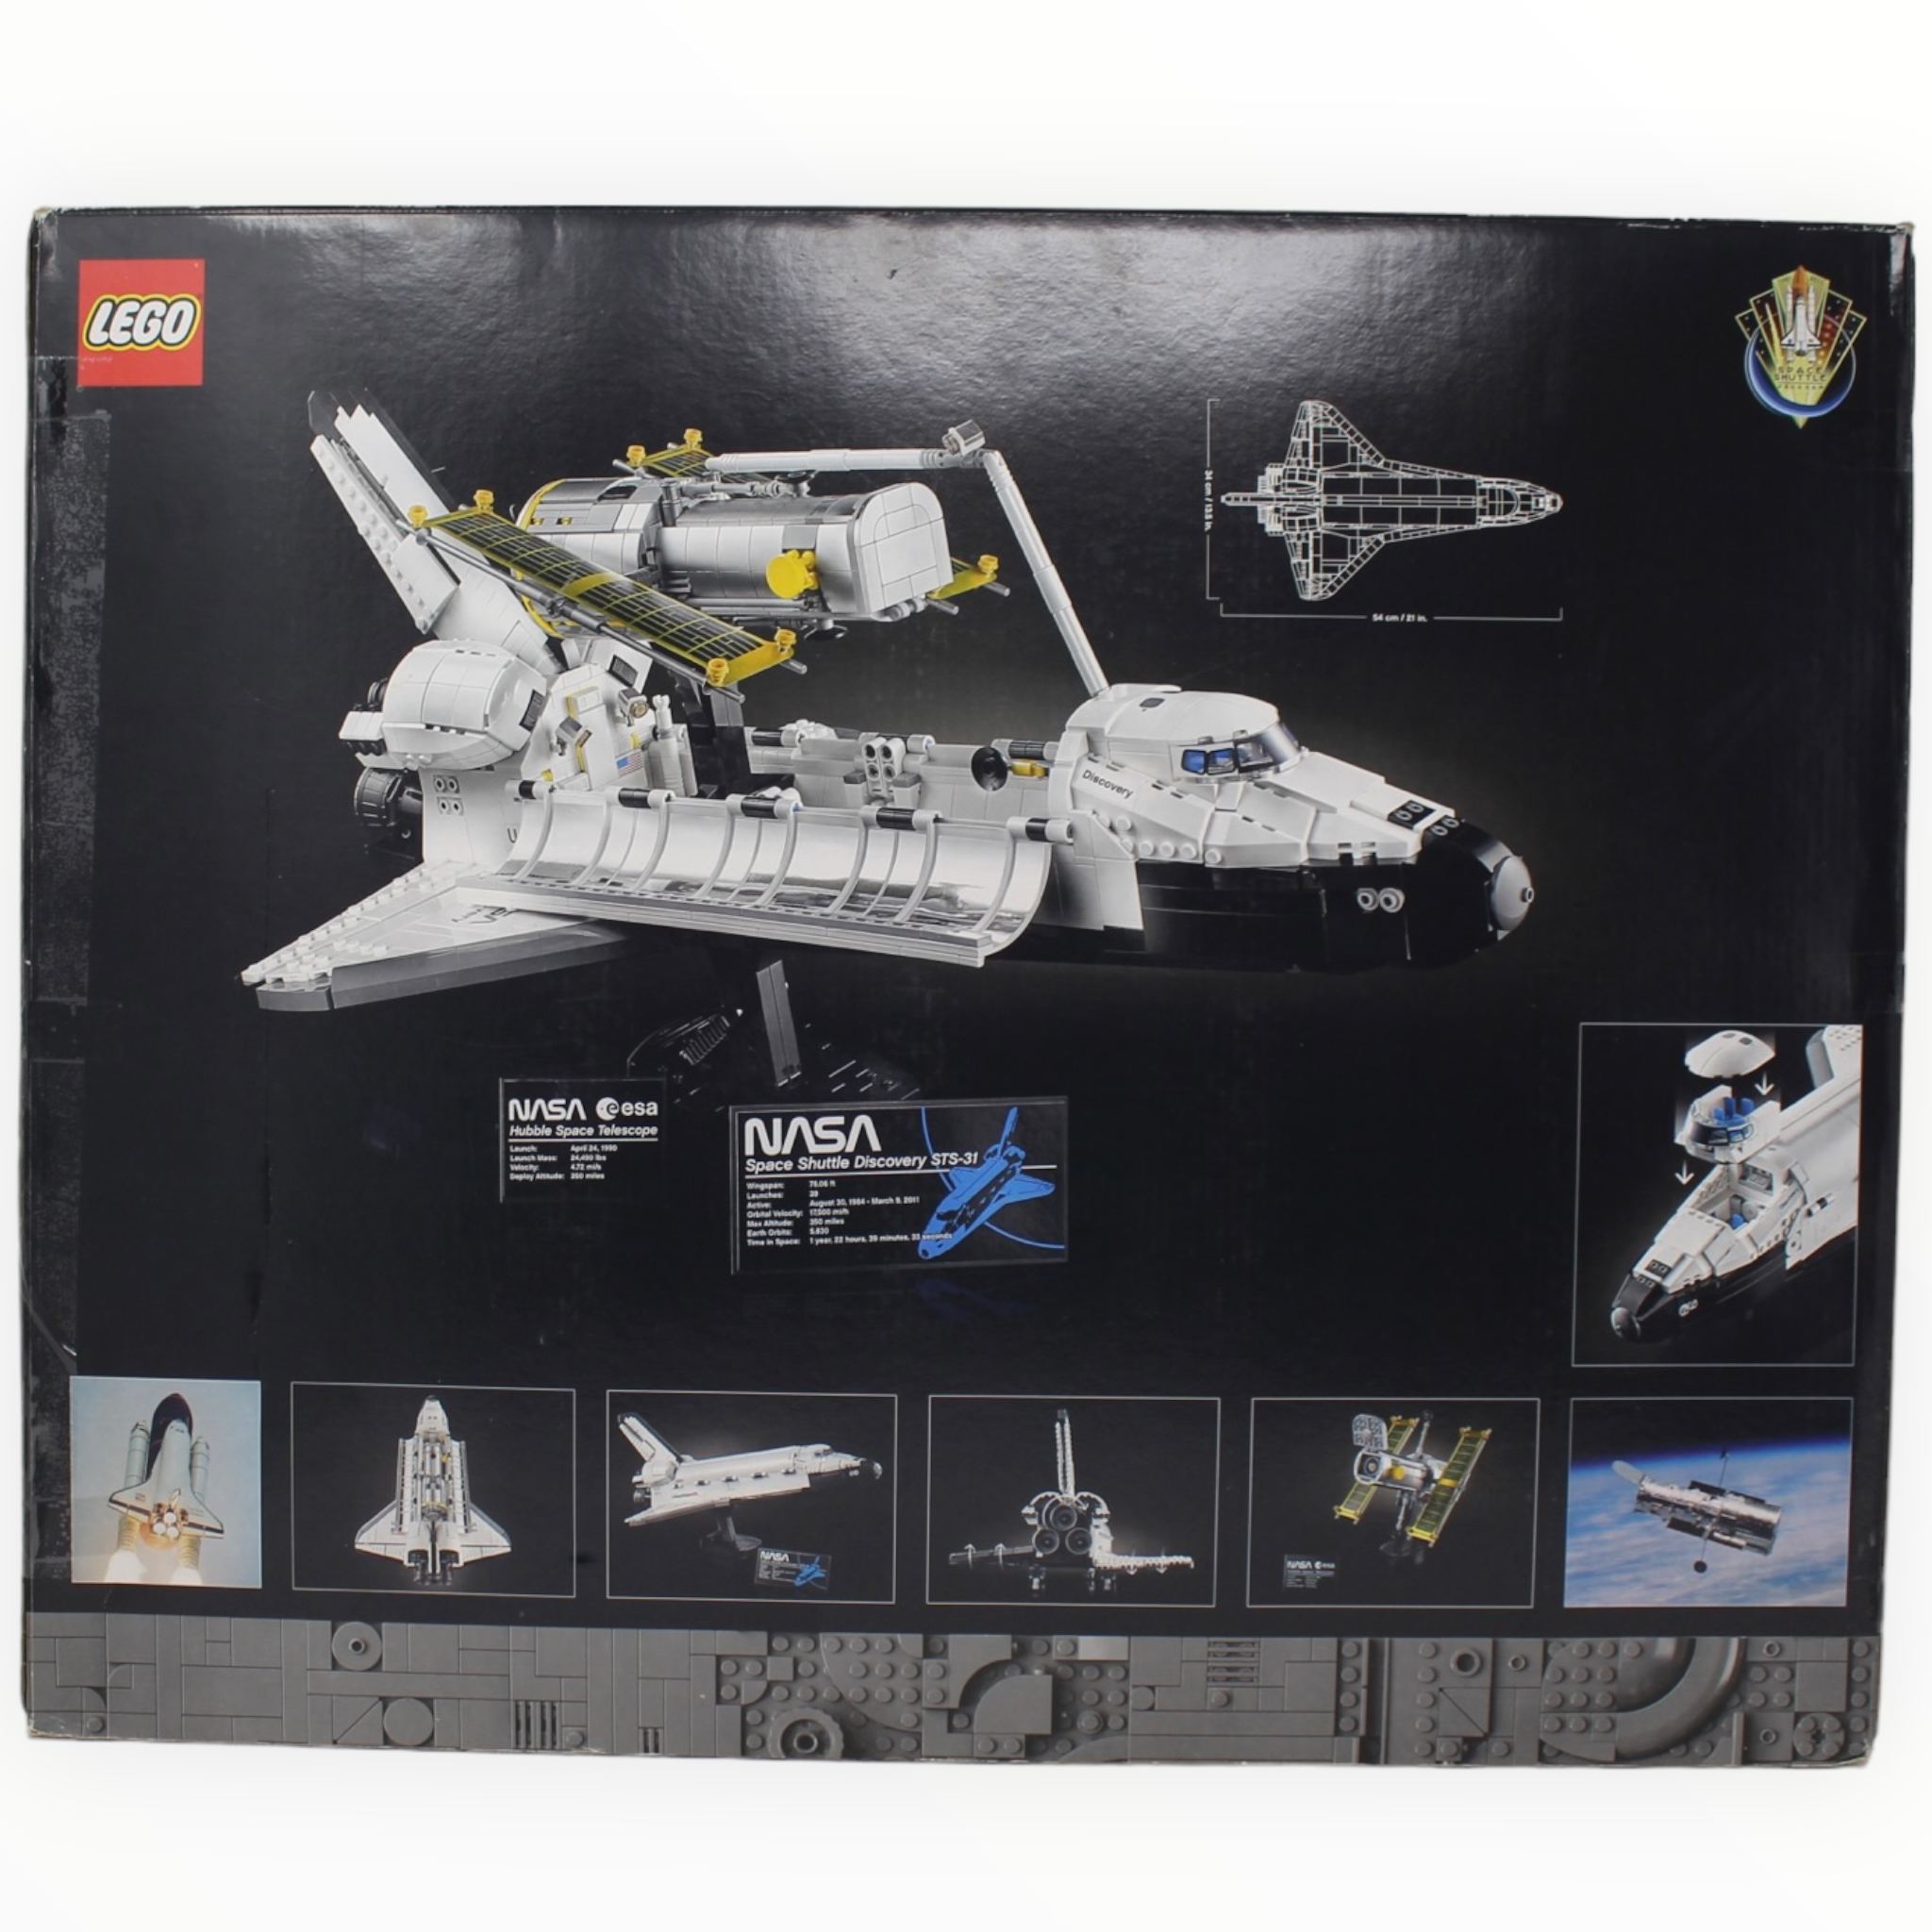 Certified Used Set 10283 NASA Space Shuttle Discovery